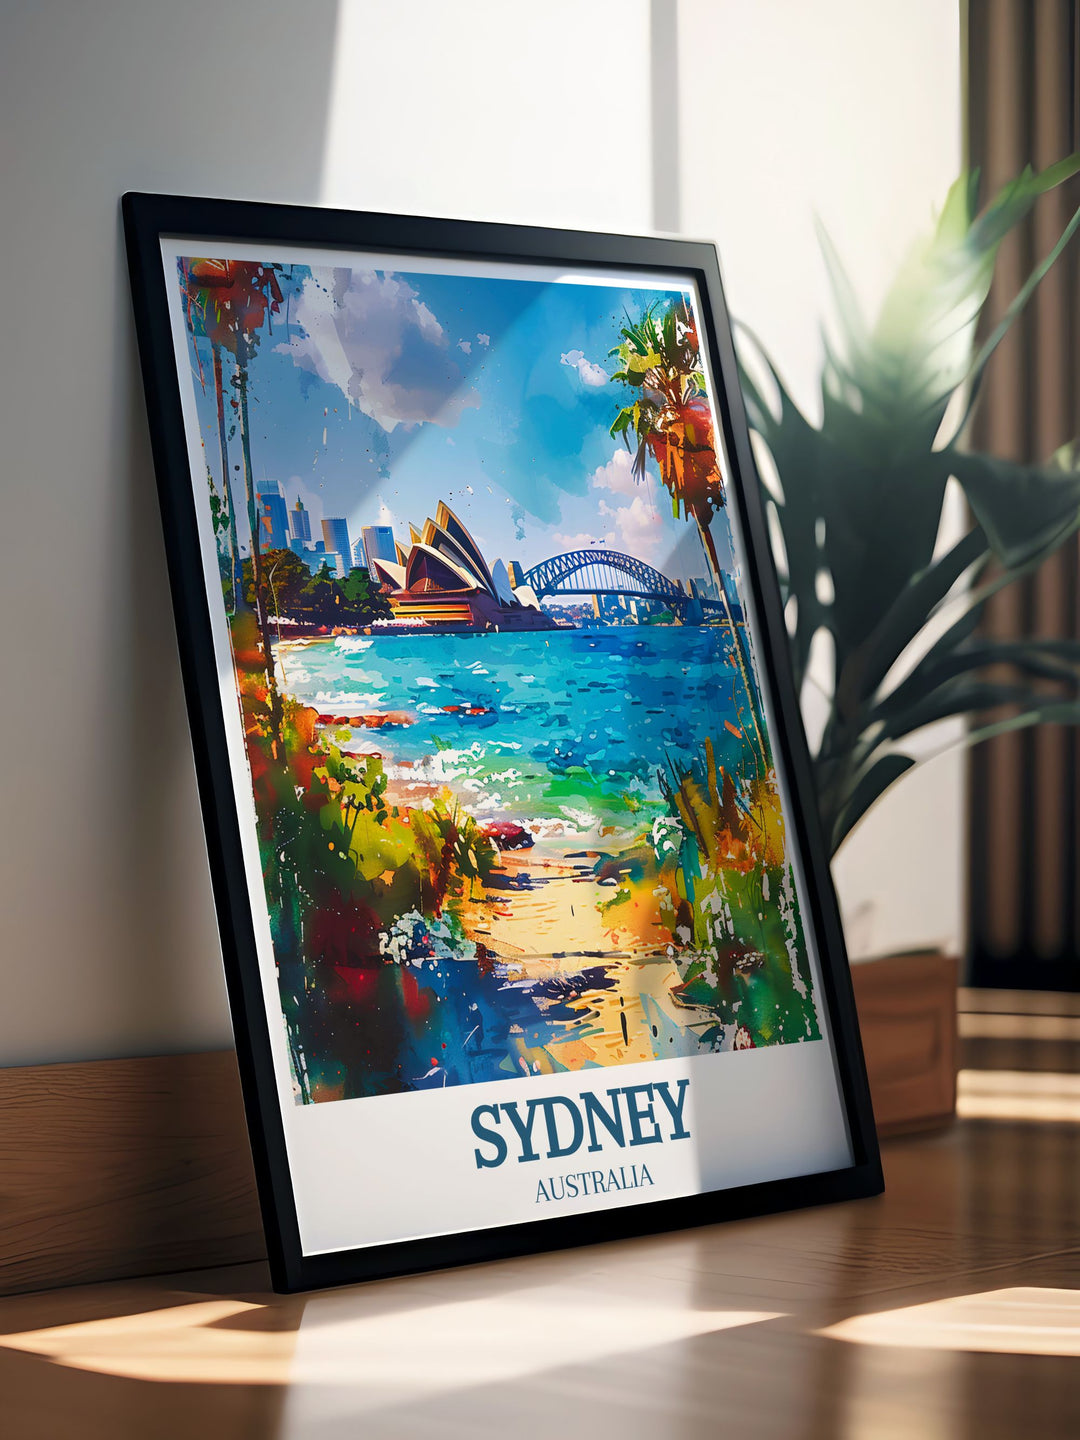 Stunning Sydney Harbour Bridge and Sydney Opera House print capturing the essence of Australias most famous city a perfect addition to your art collection or as a memorable gift for anyone who loves travel and vintage prints